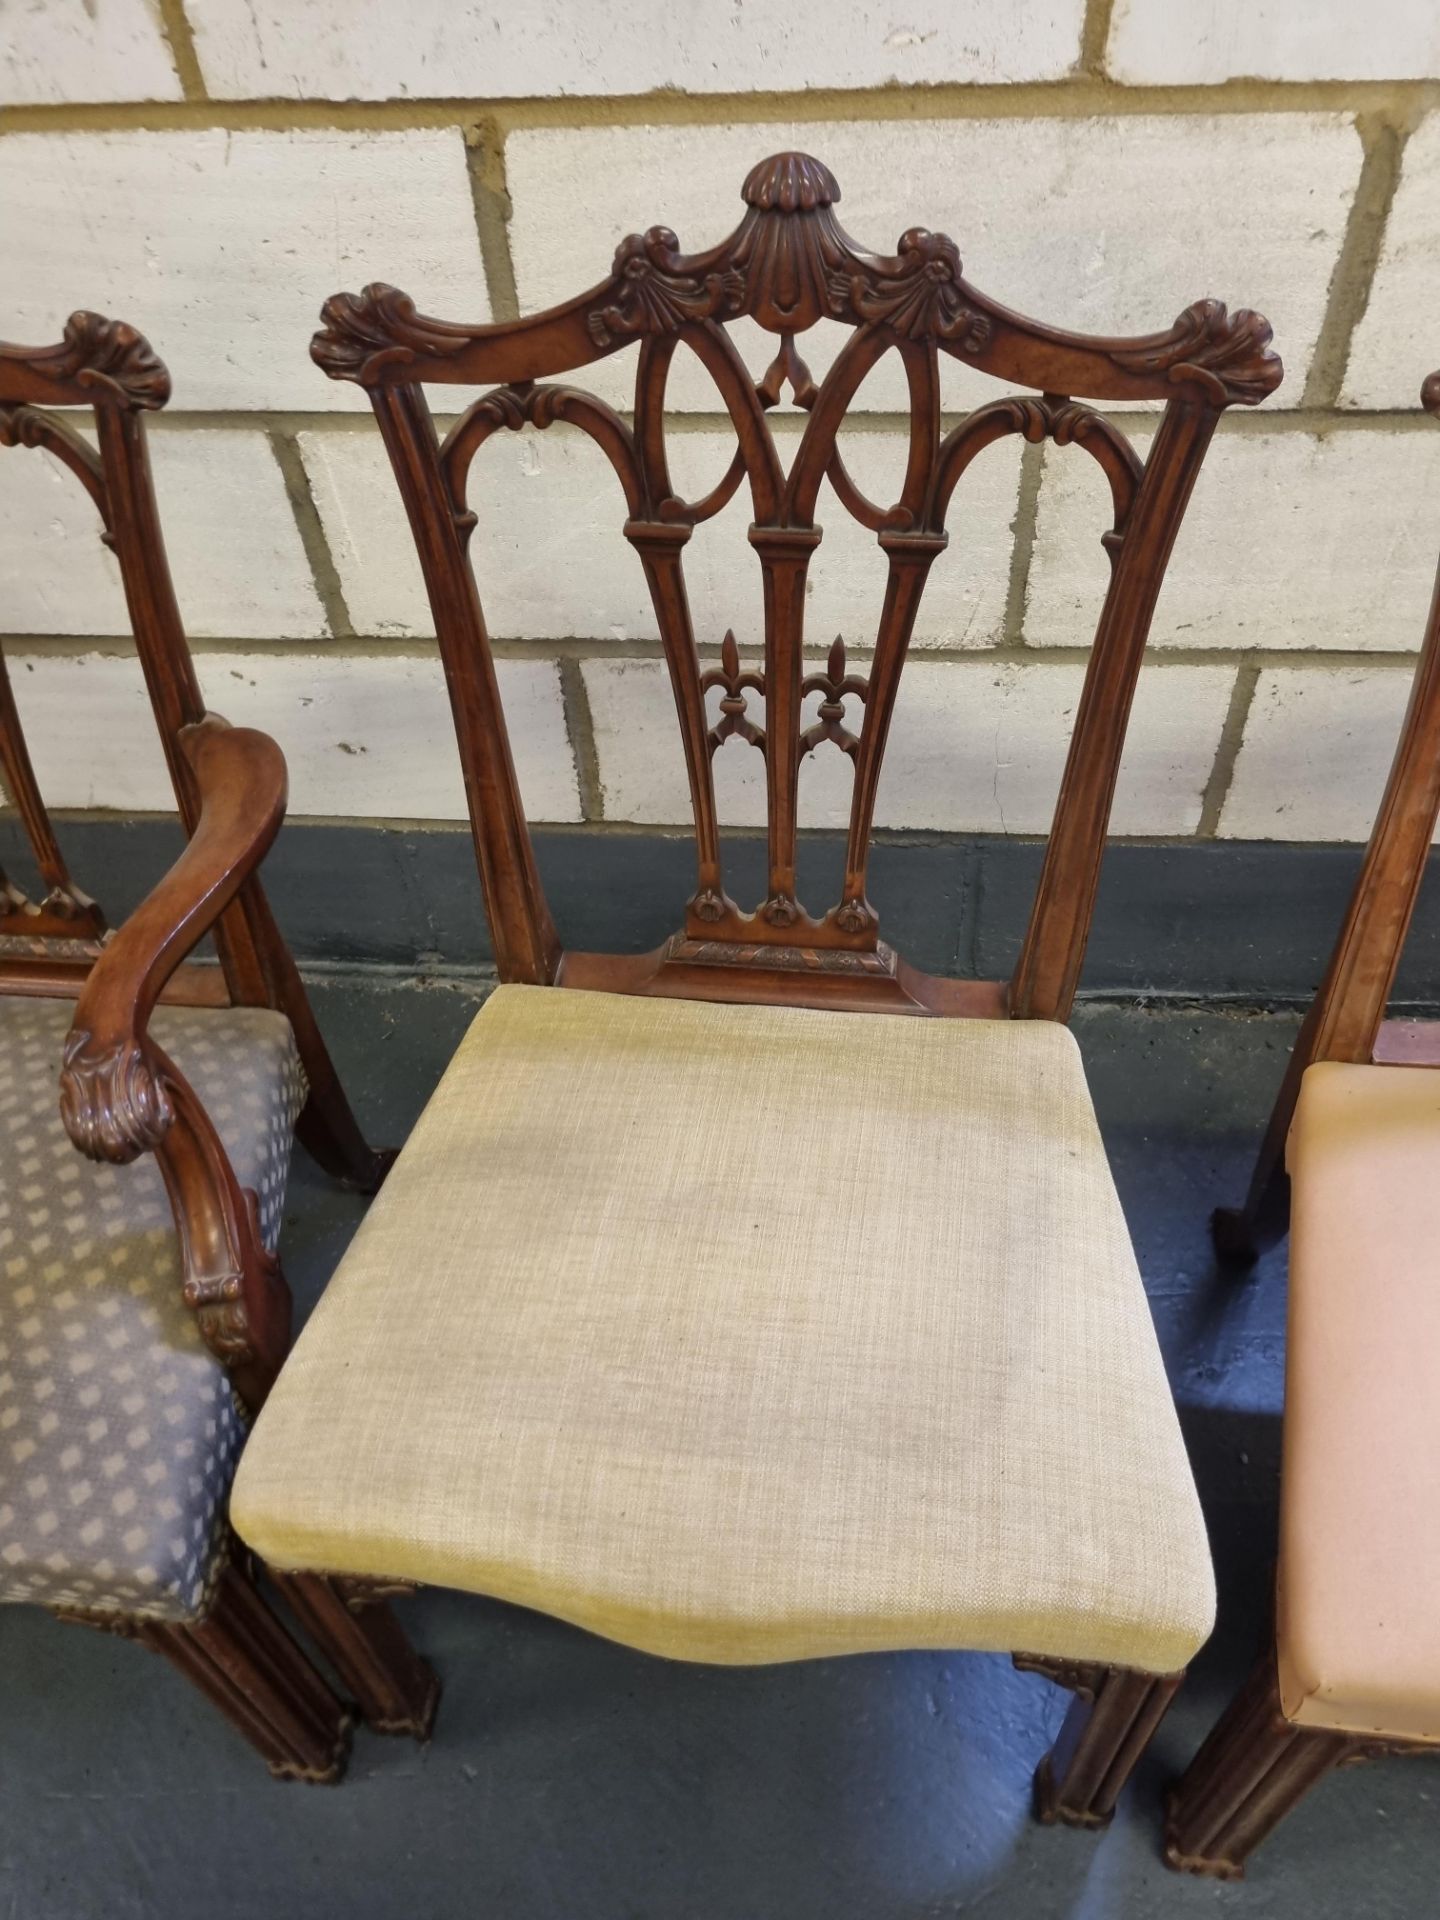 3 X Arthur Brett Mahogany Upholstered Dining Chairs With Great Carving Detail To Back And Legs; - Image 4 of 5